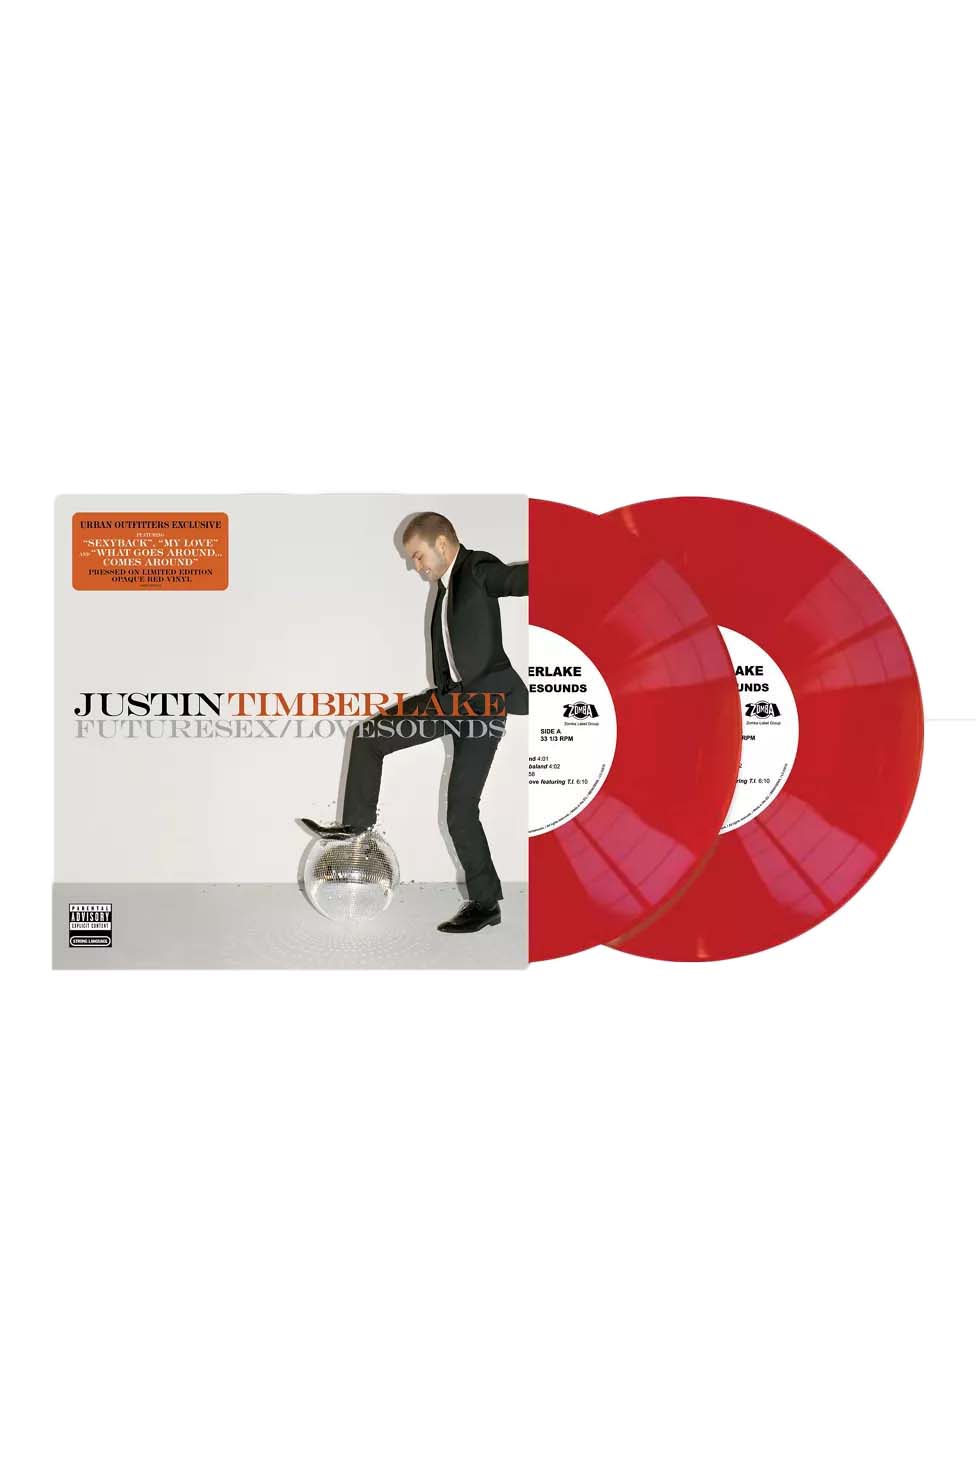 Justin Timberlake FutureSex/LoveSounds Urban Outfitters Exclusive 